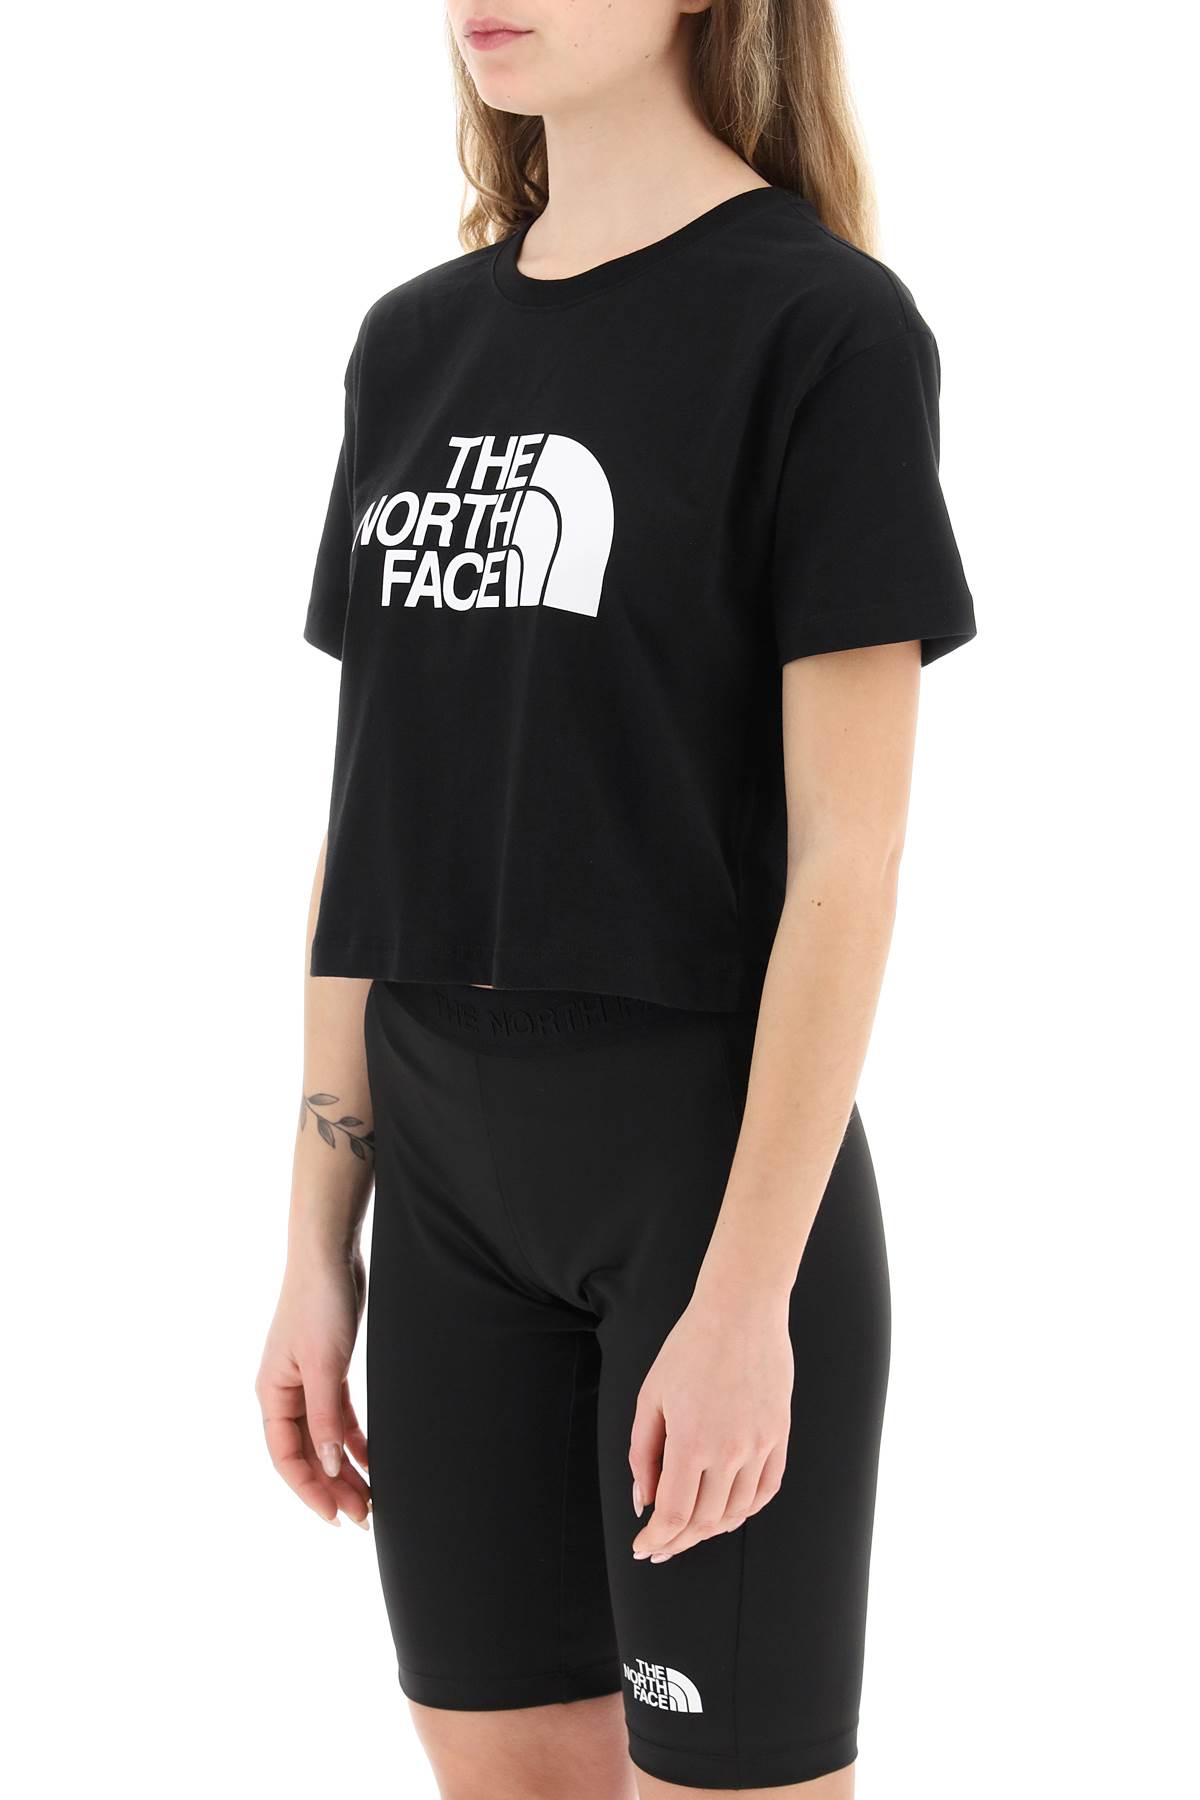 THE NORTH FACE LOGO PRINT EASY T-SHIRT 